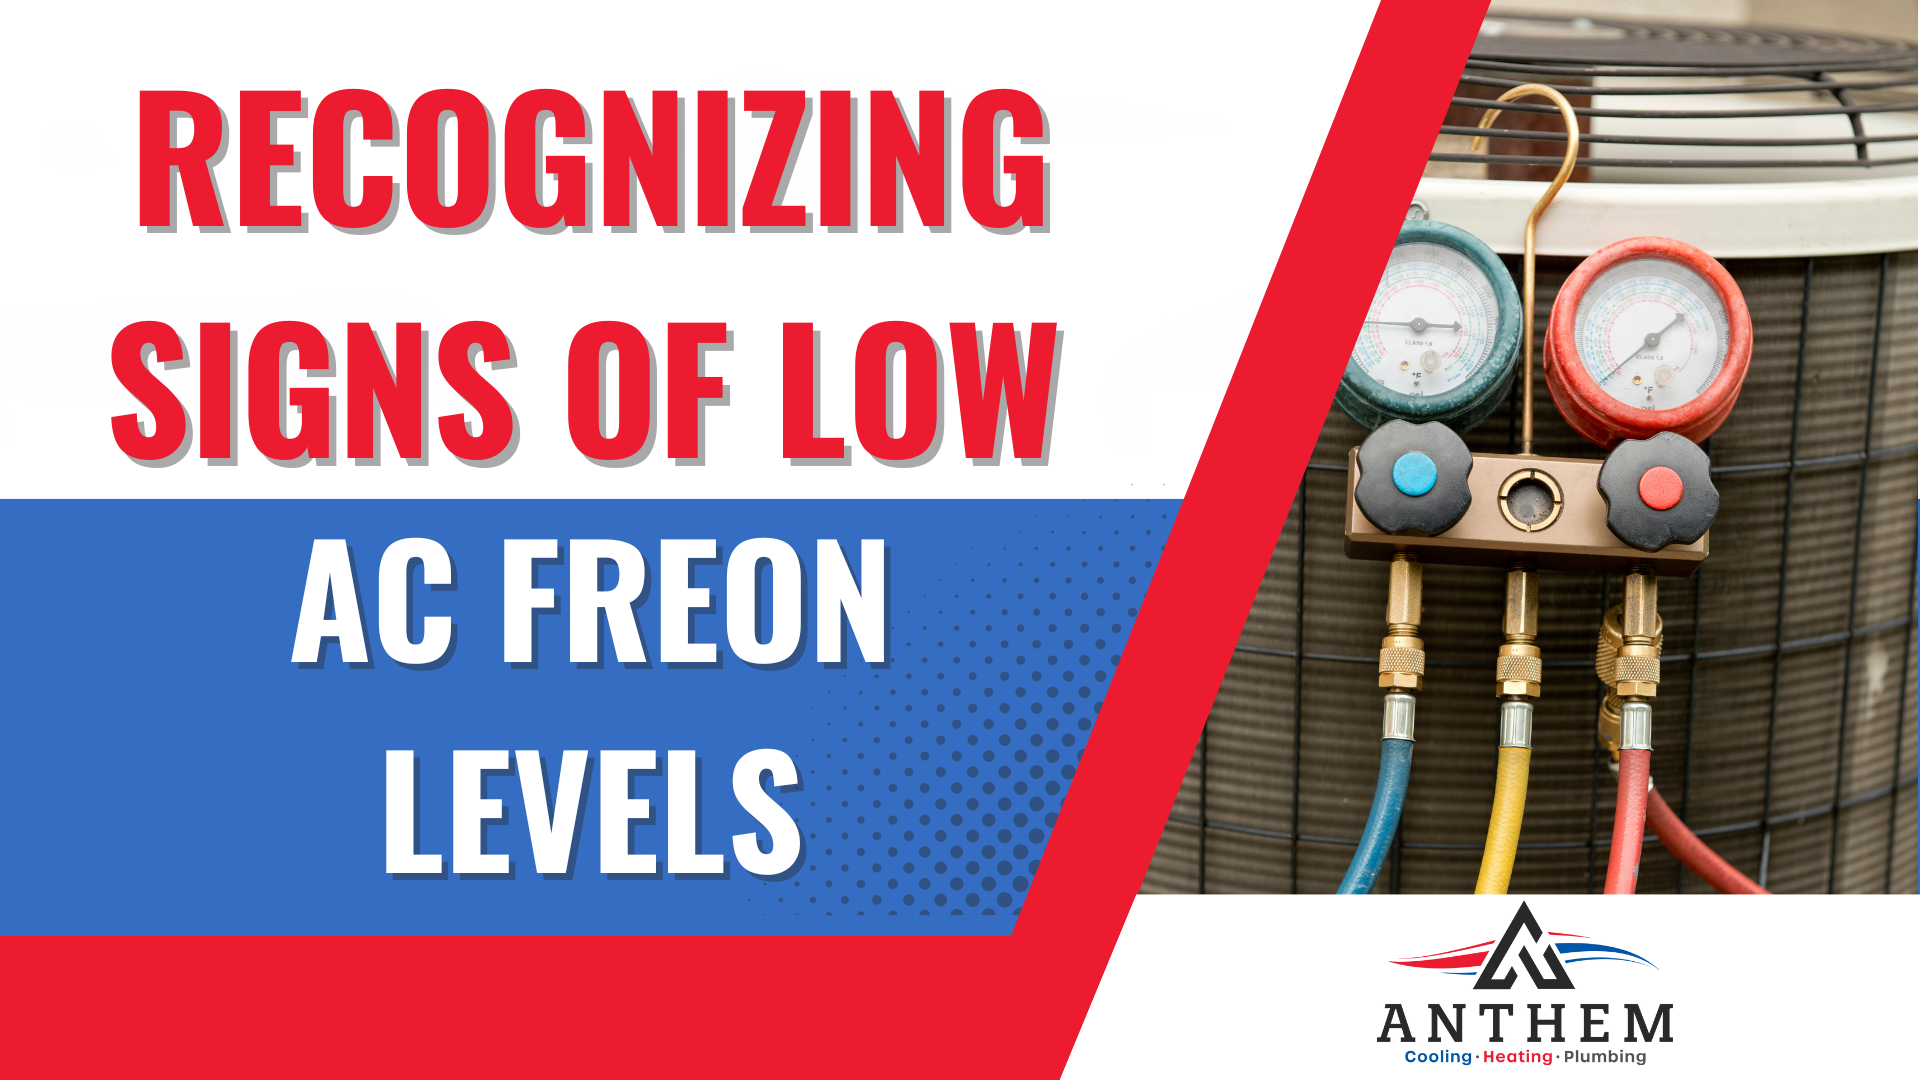 Recognizing Signs of Low AC Freon Levels